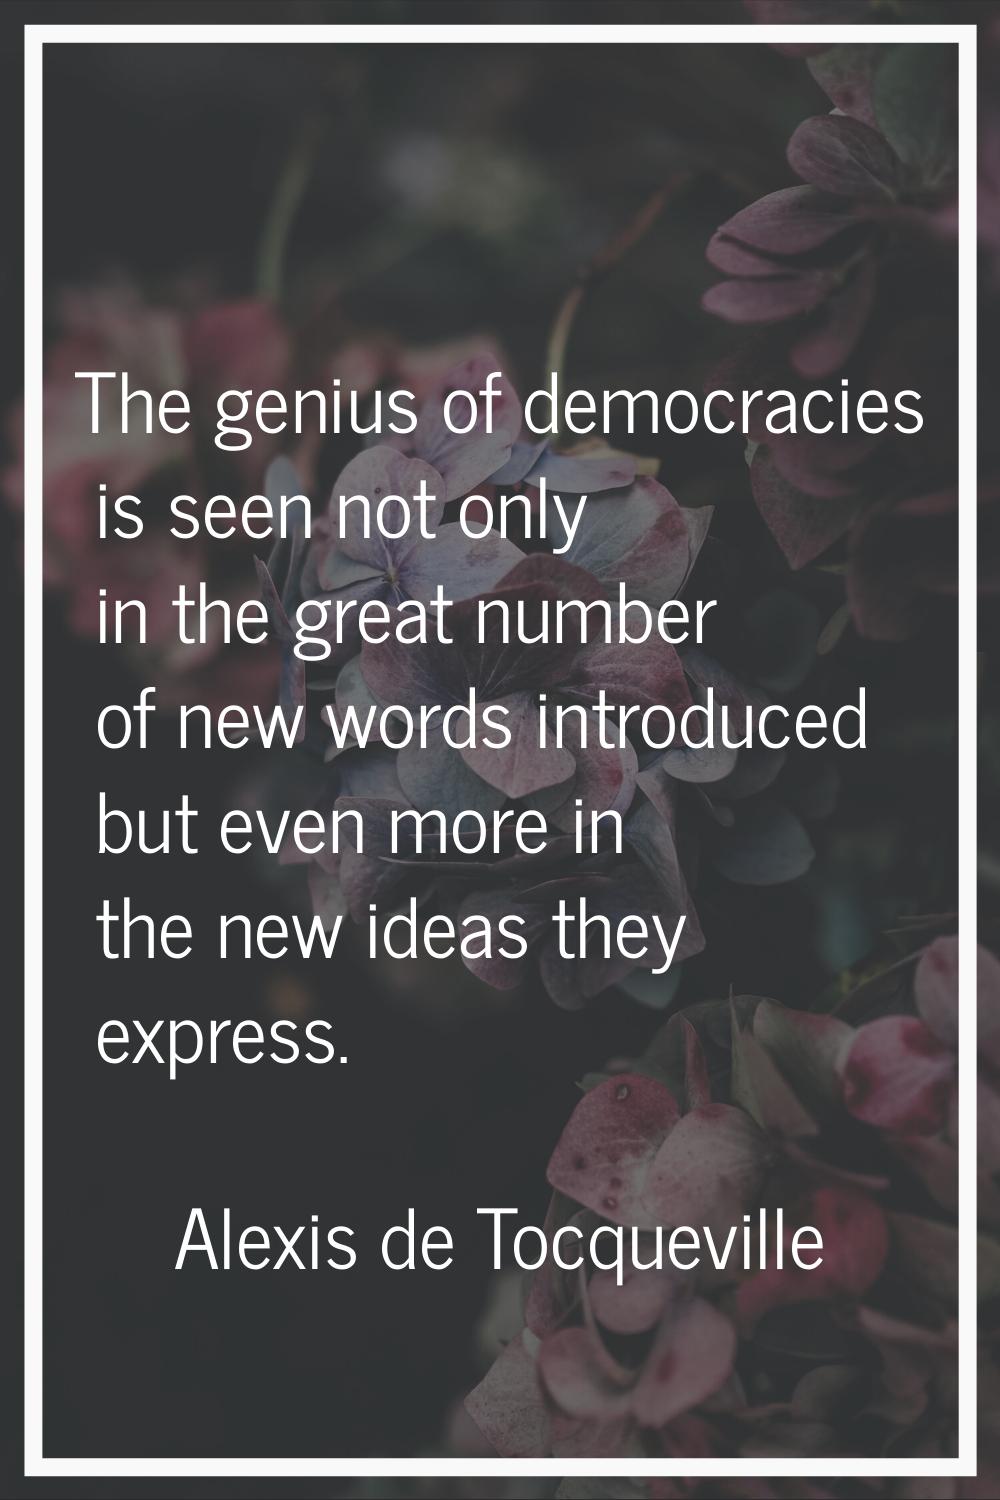 The genius of democracies is seen not only in the great number of new words introduced but even mor